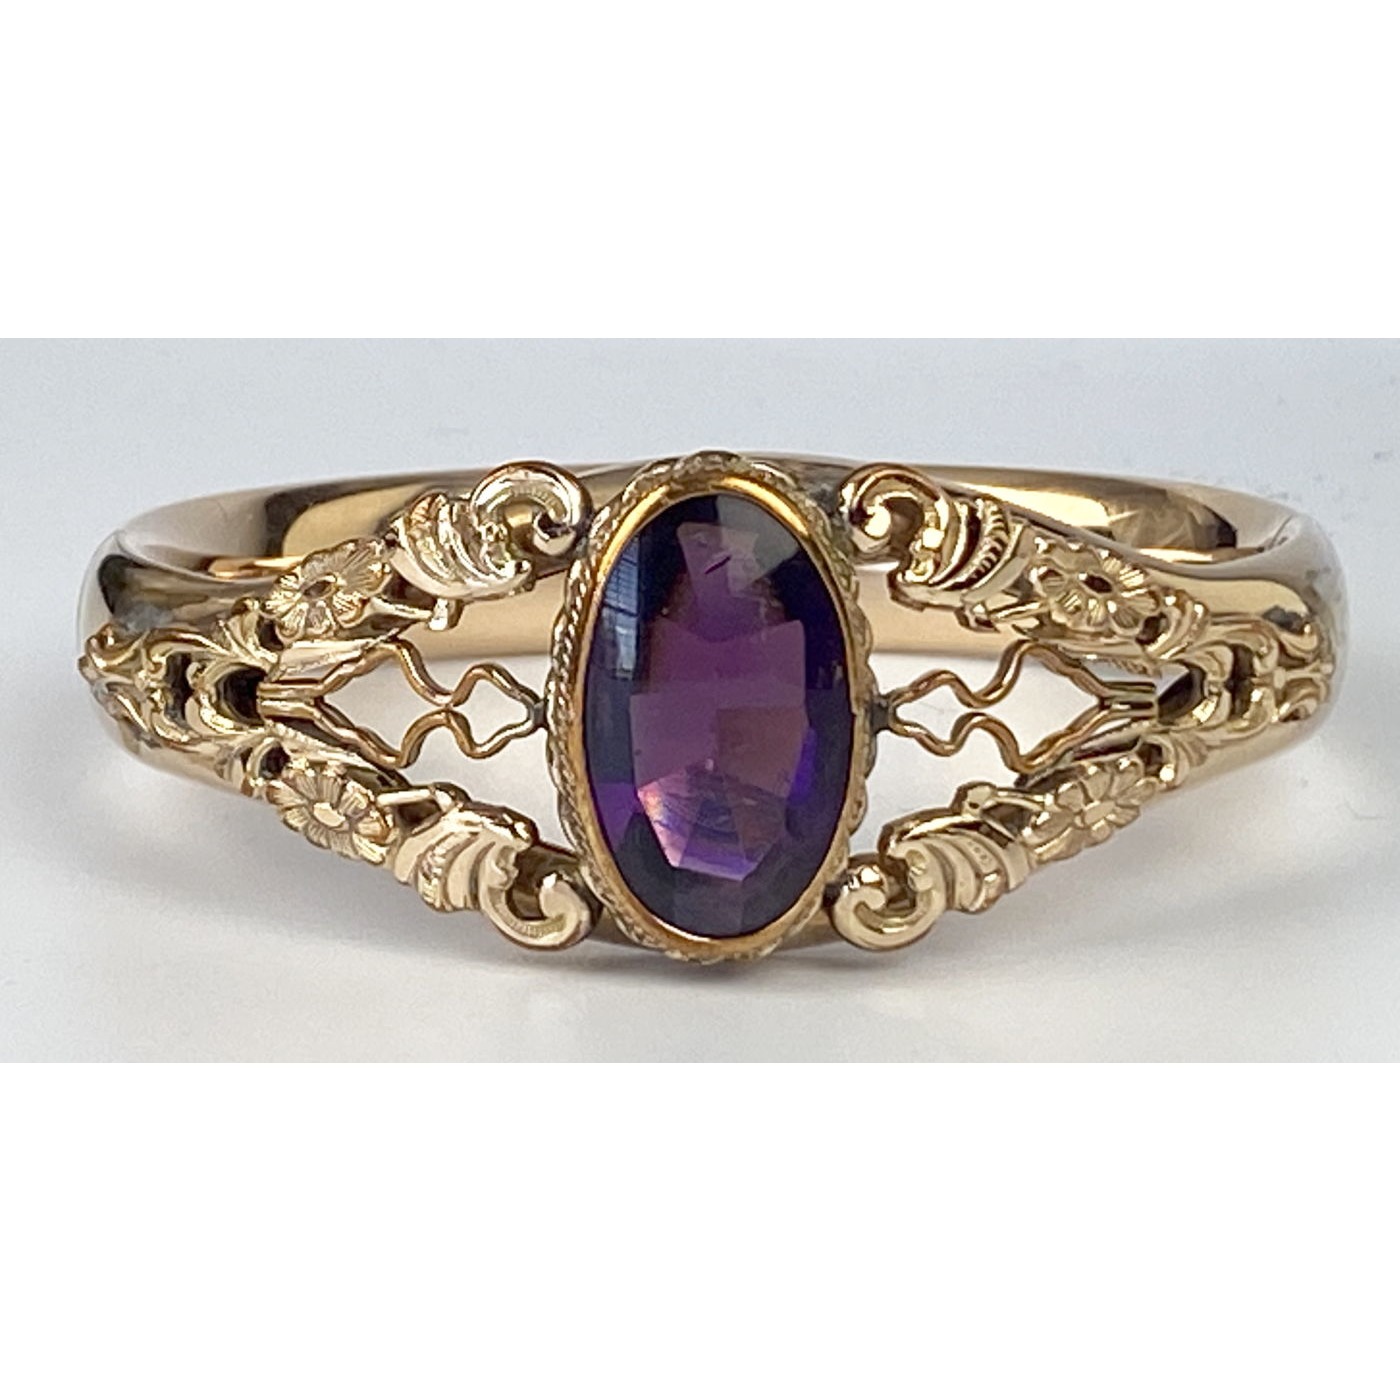 Deep Purple Oval Center Stone Lots of Repousse Engagement Bangle